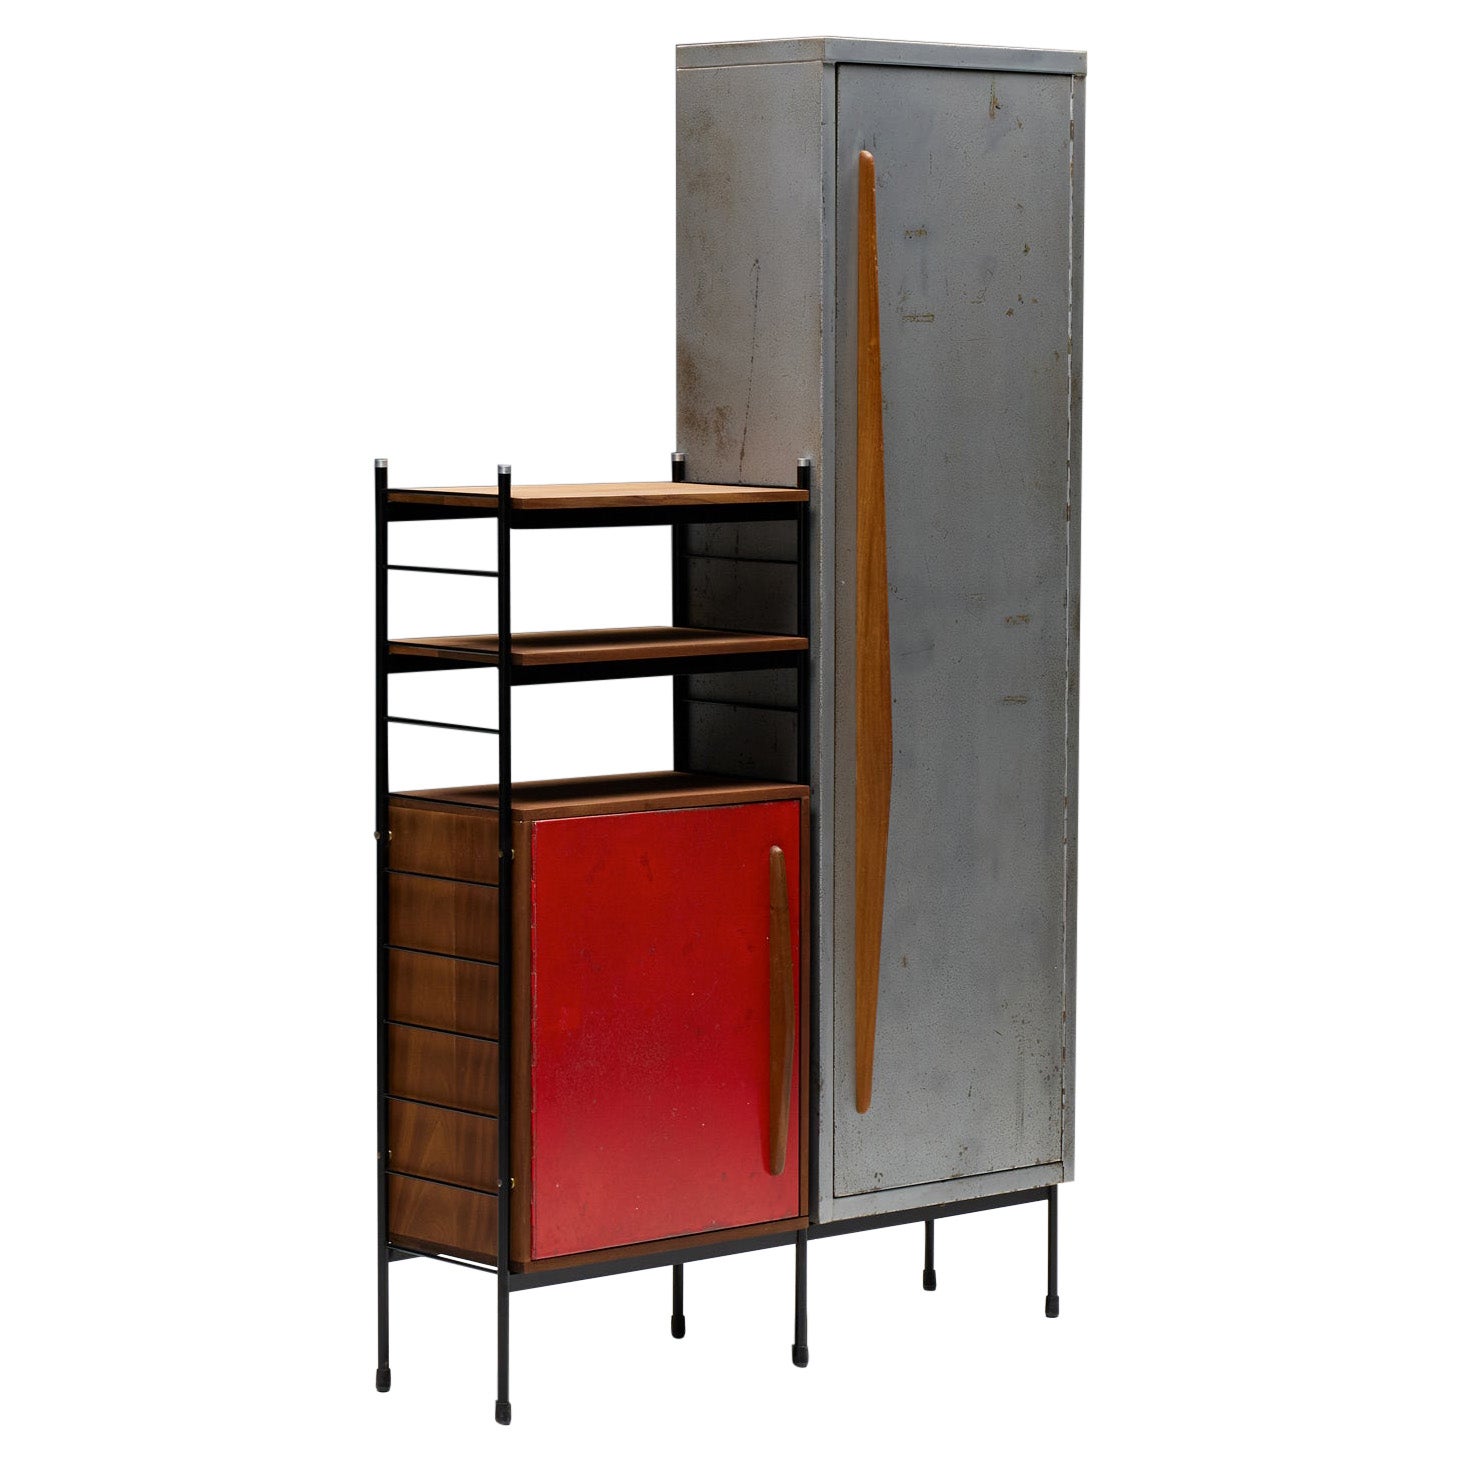 Cabinet by Willy Van der Meeren & Eric Lemesre for Tubax, 1950's For Sale